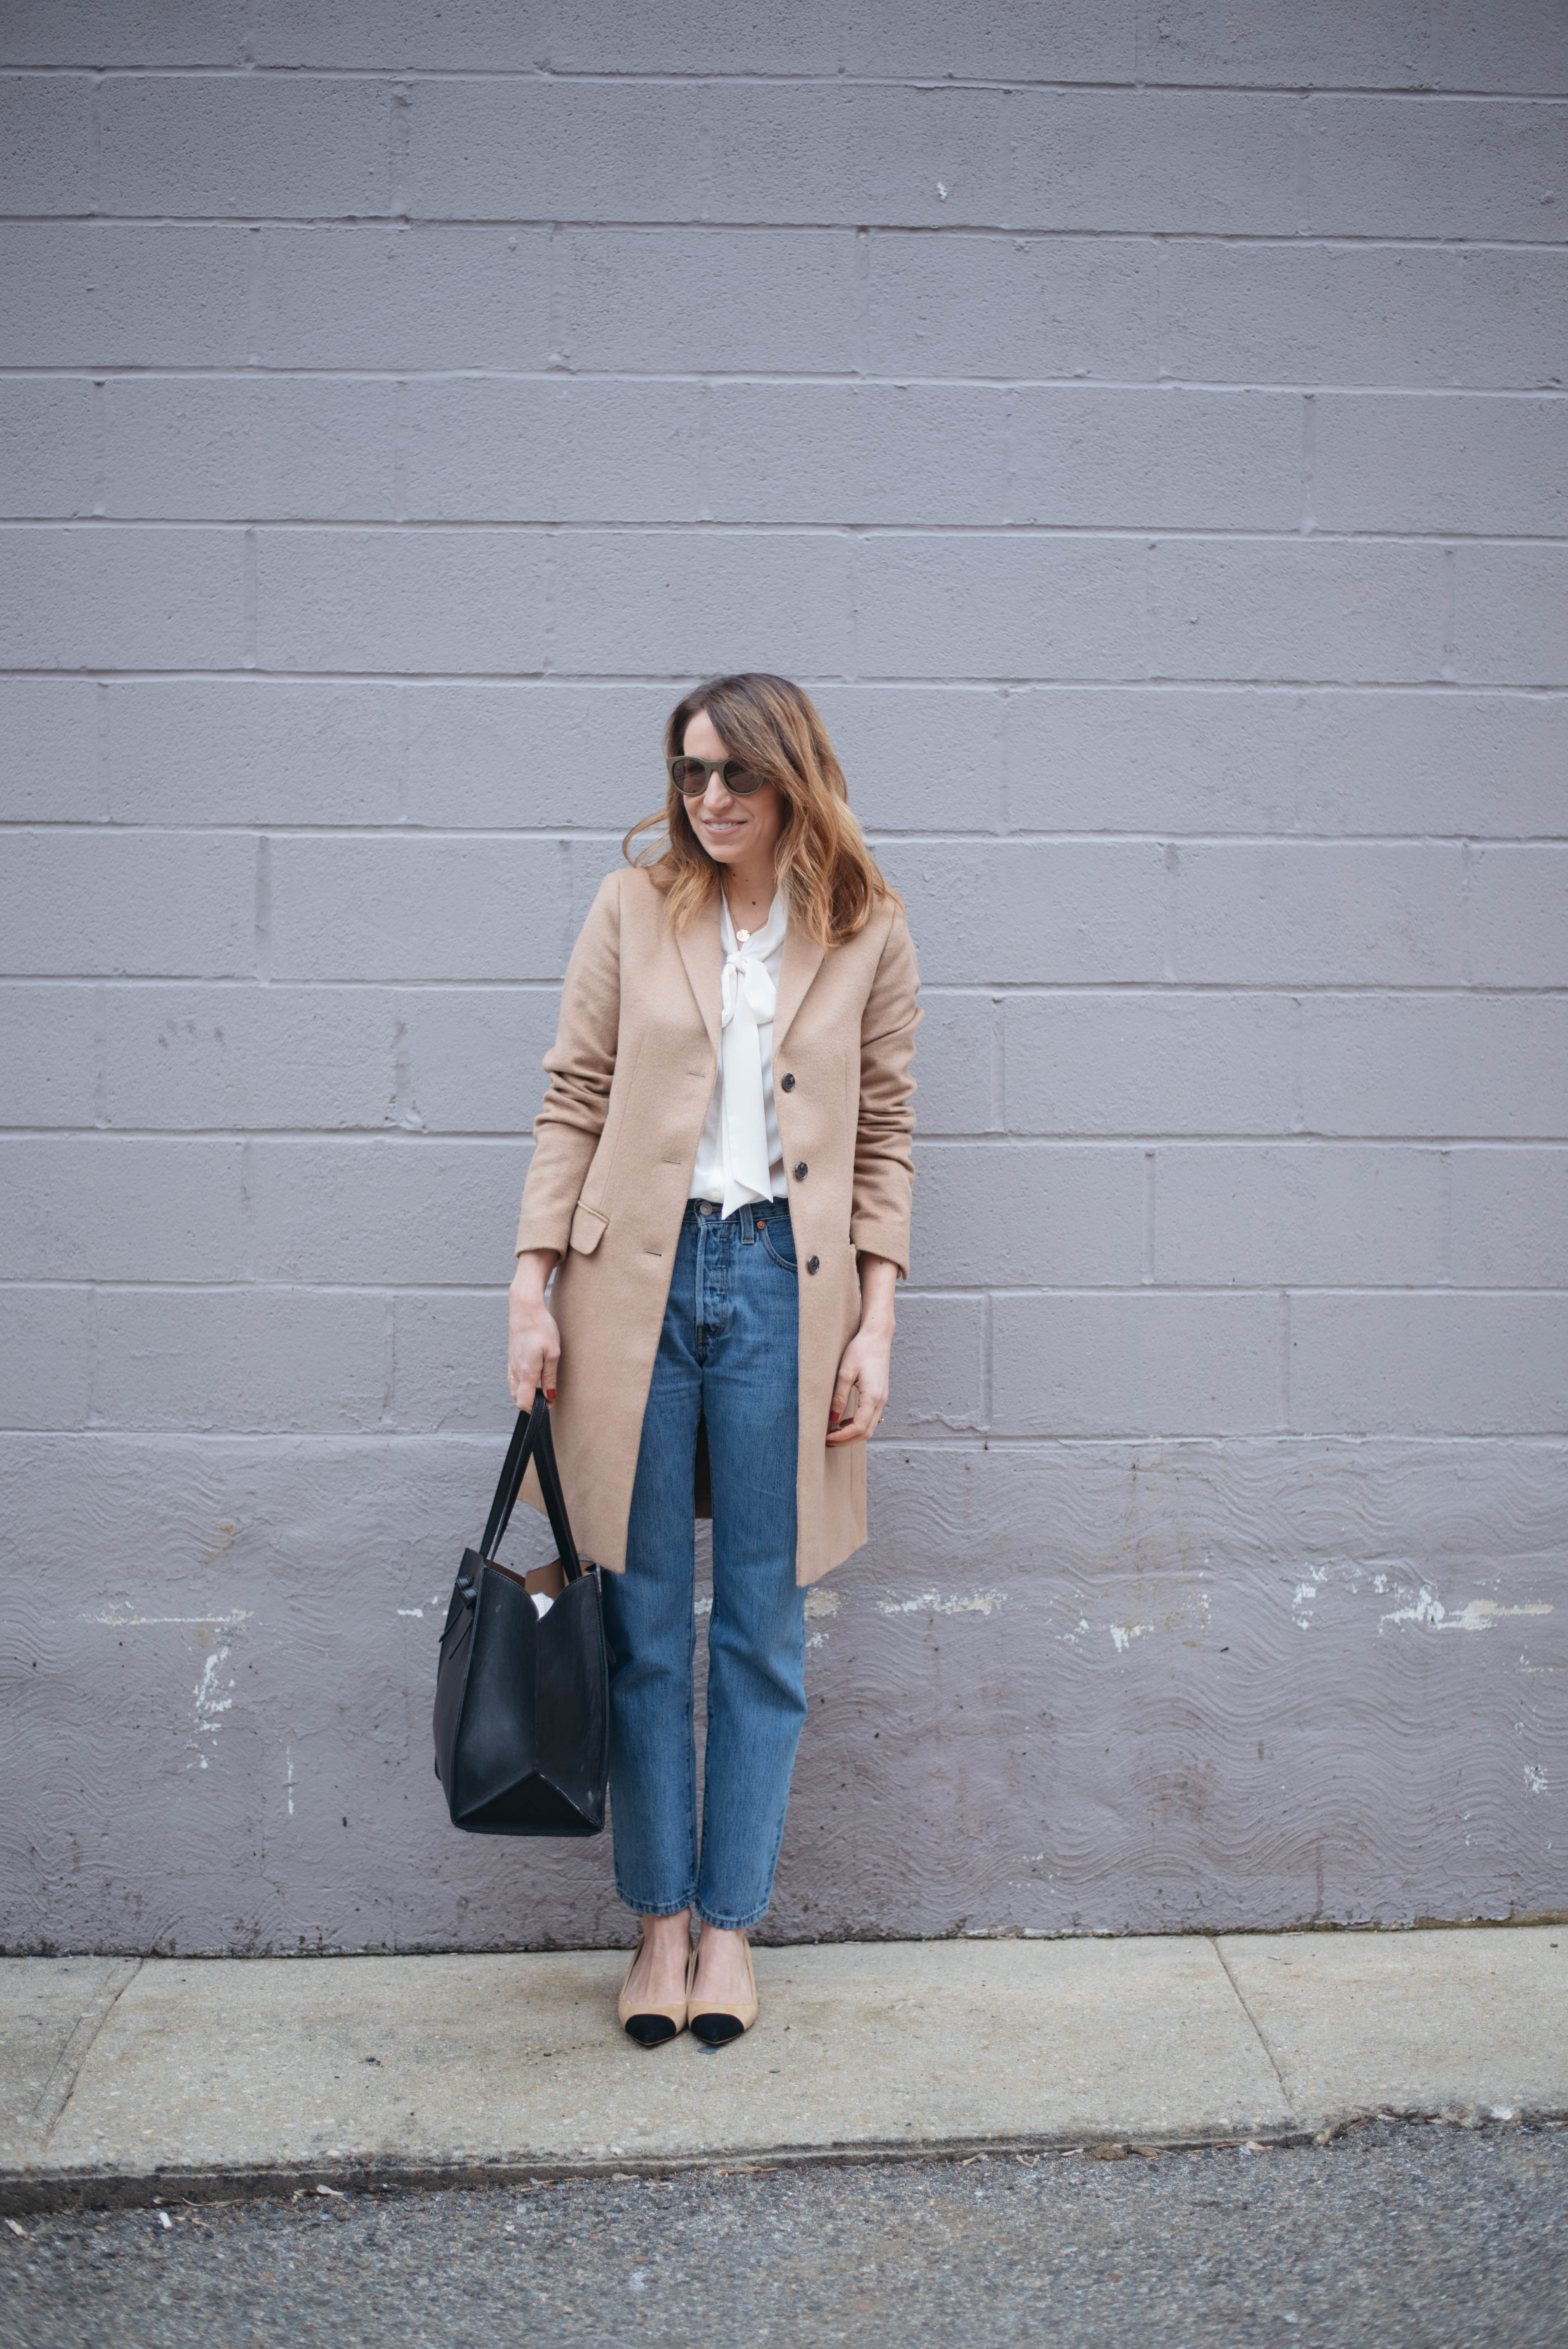 How To Style Mom Jeans - The Mama Notes